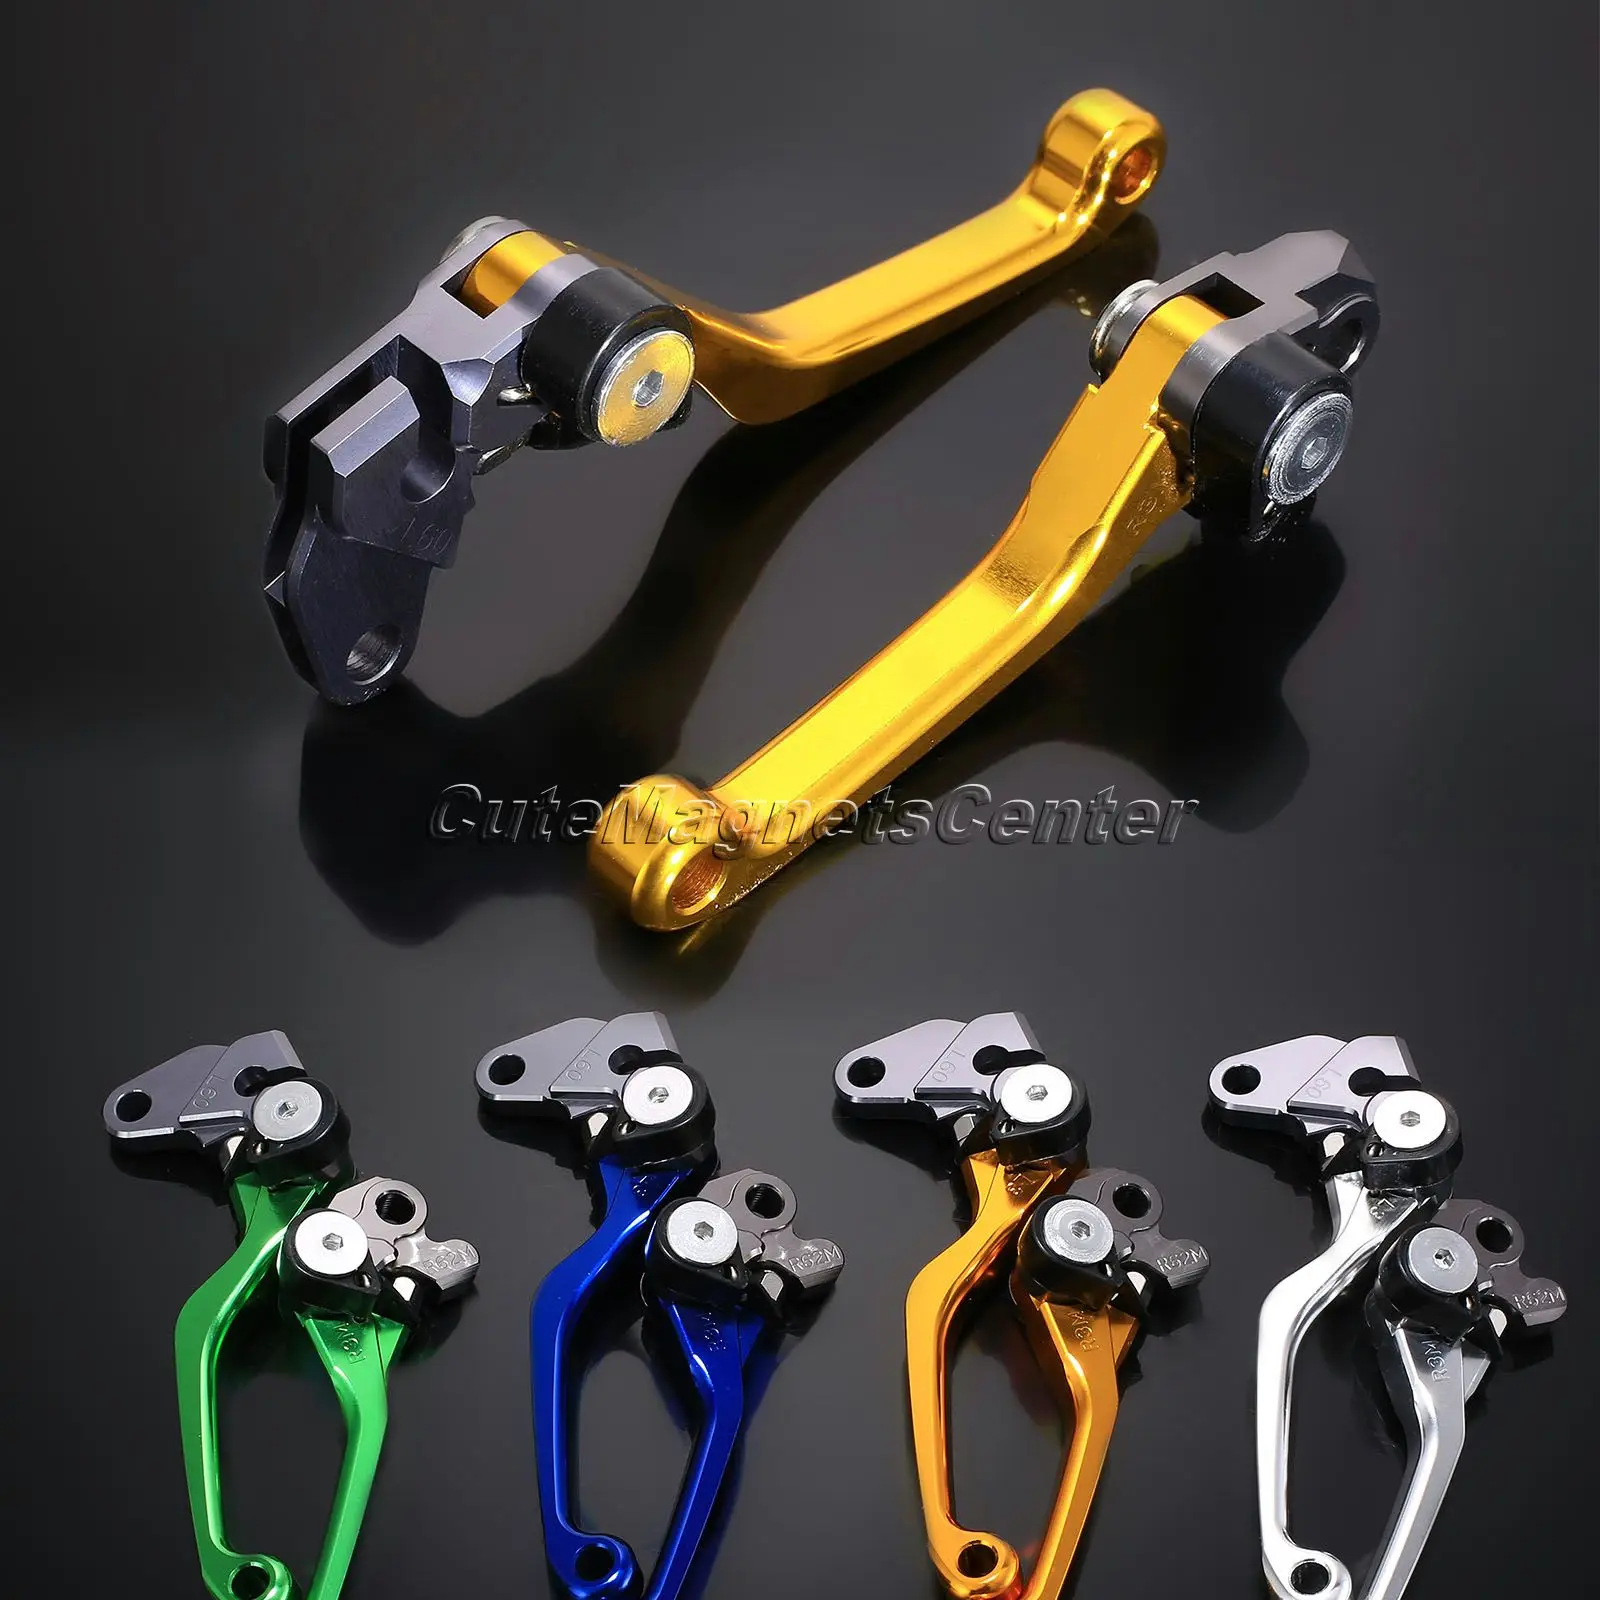 1 Pair CNC Universal R65M/L66M Motorbike Brakes Clutch Levers Cross Country Motorcycle For Yamaha YZ125/250/250F/426F/450F 09-16